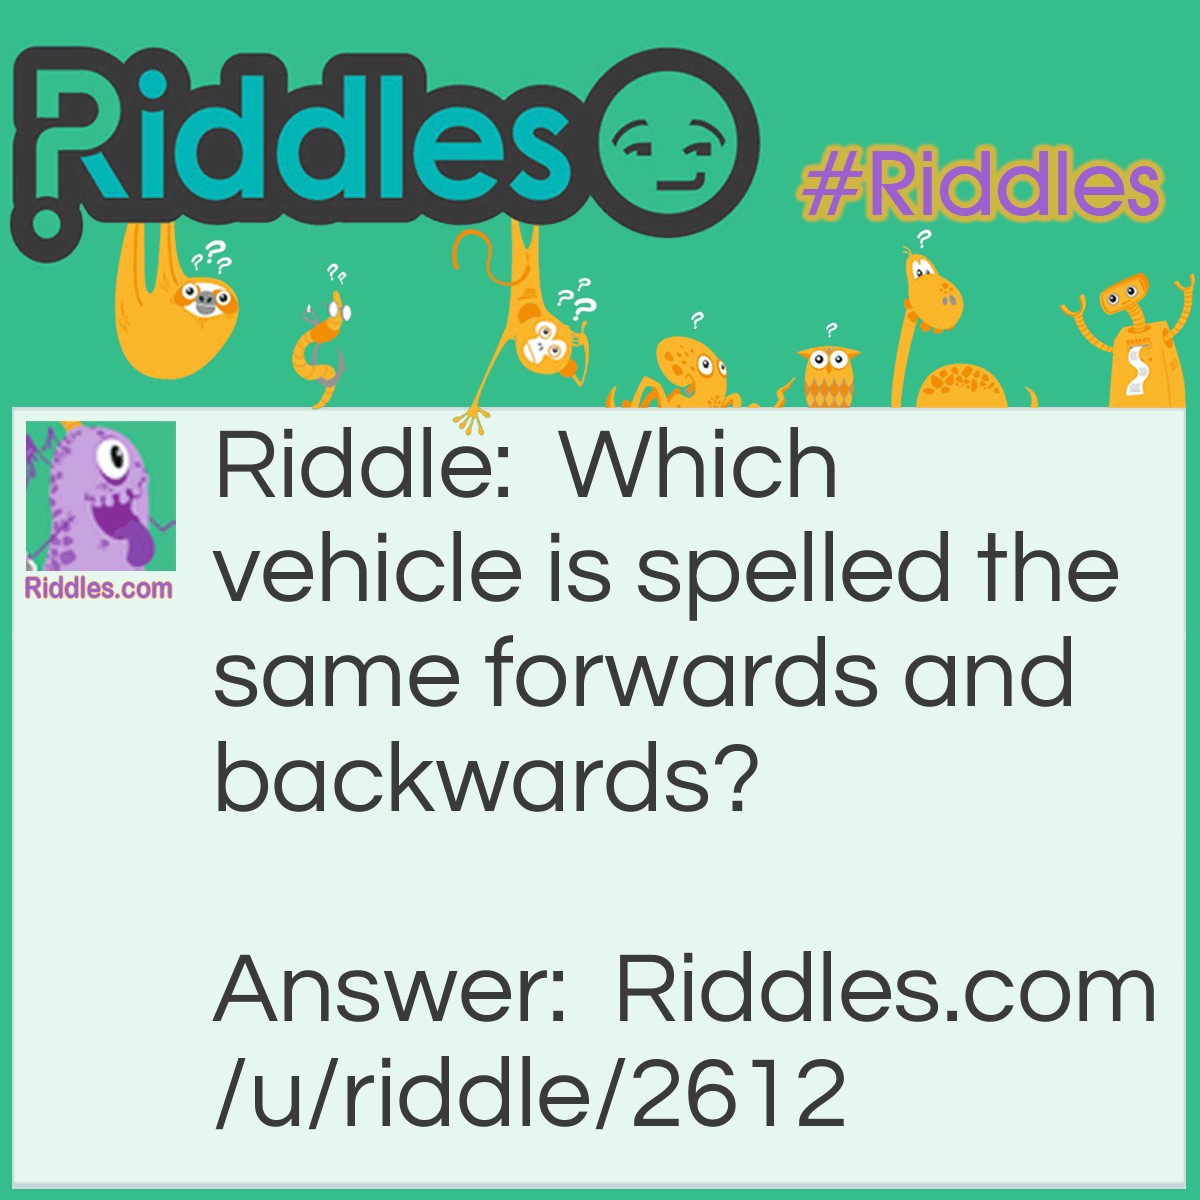 Riddle: Which vehicle is spelled the same forwards and backwards? Answer: Racecar!